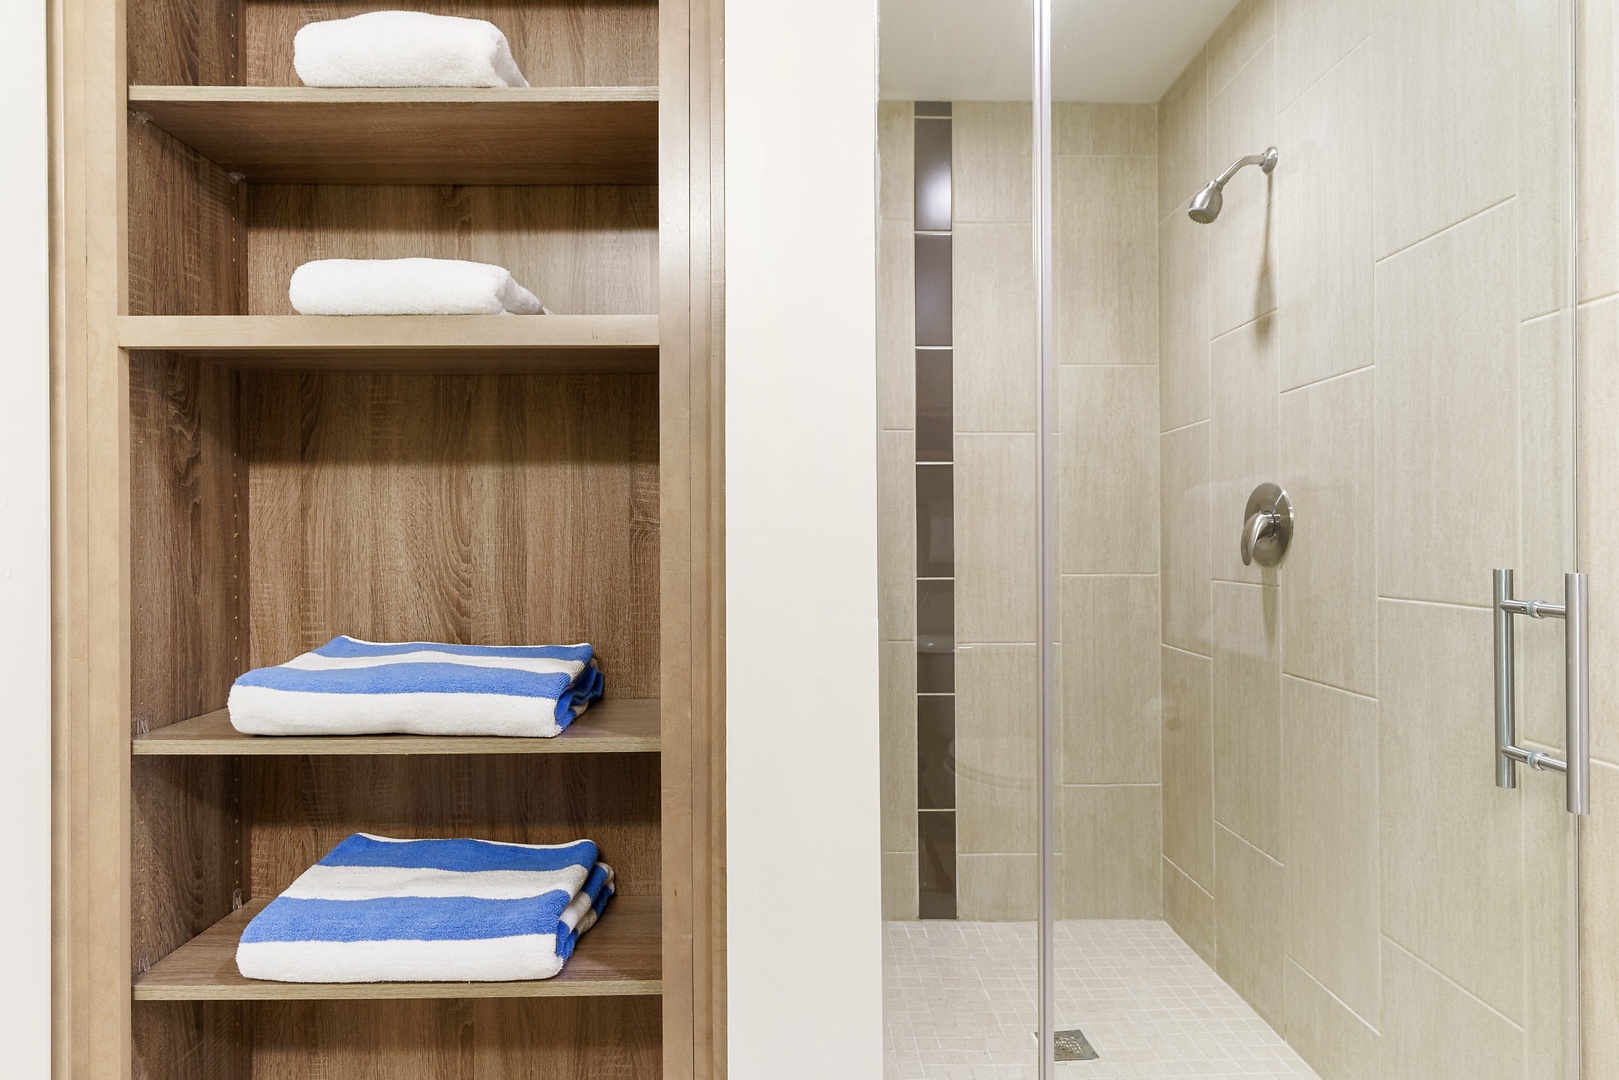 Feel invigorated in the modern walk-in shower with sleek fixtures.